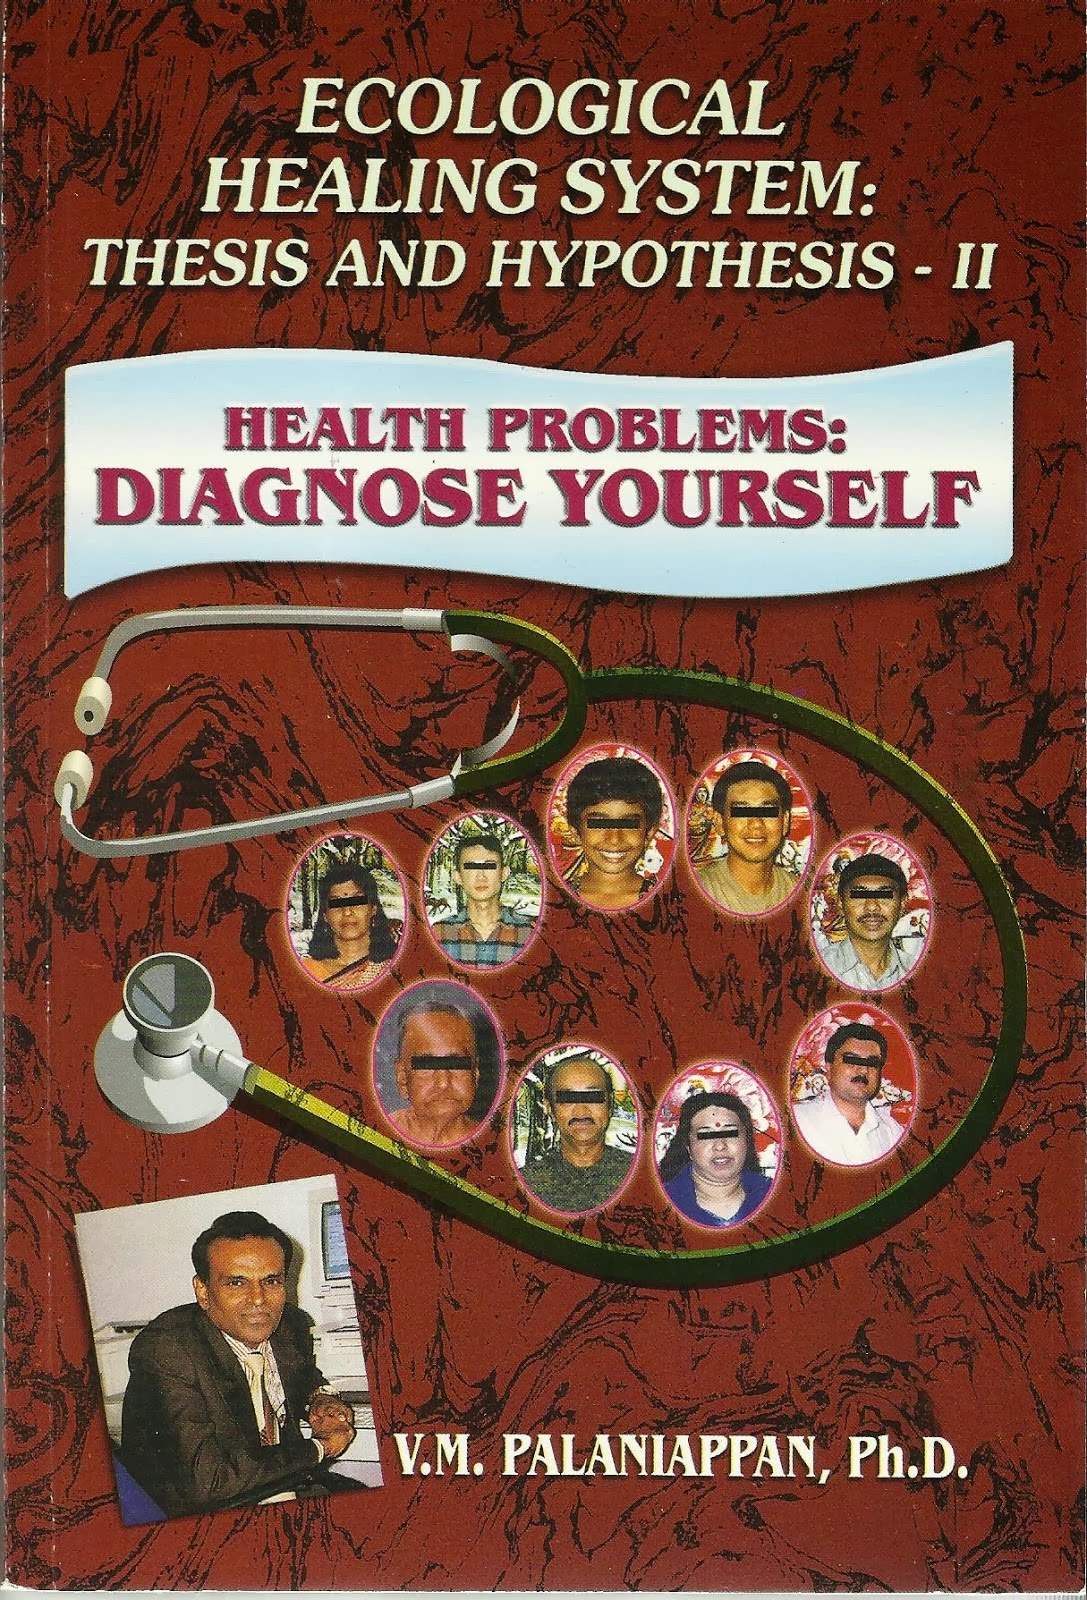 HEALTH PROBLEMS: DIAGNOSE YOURSELF